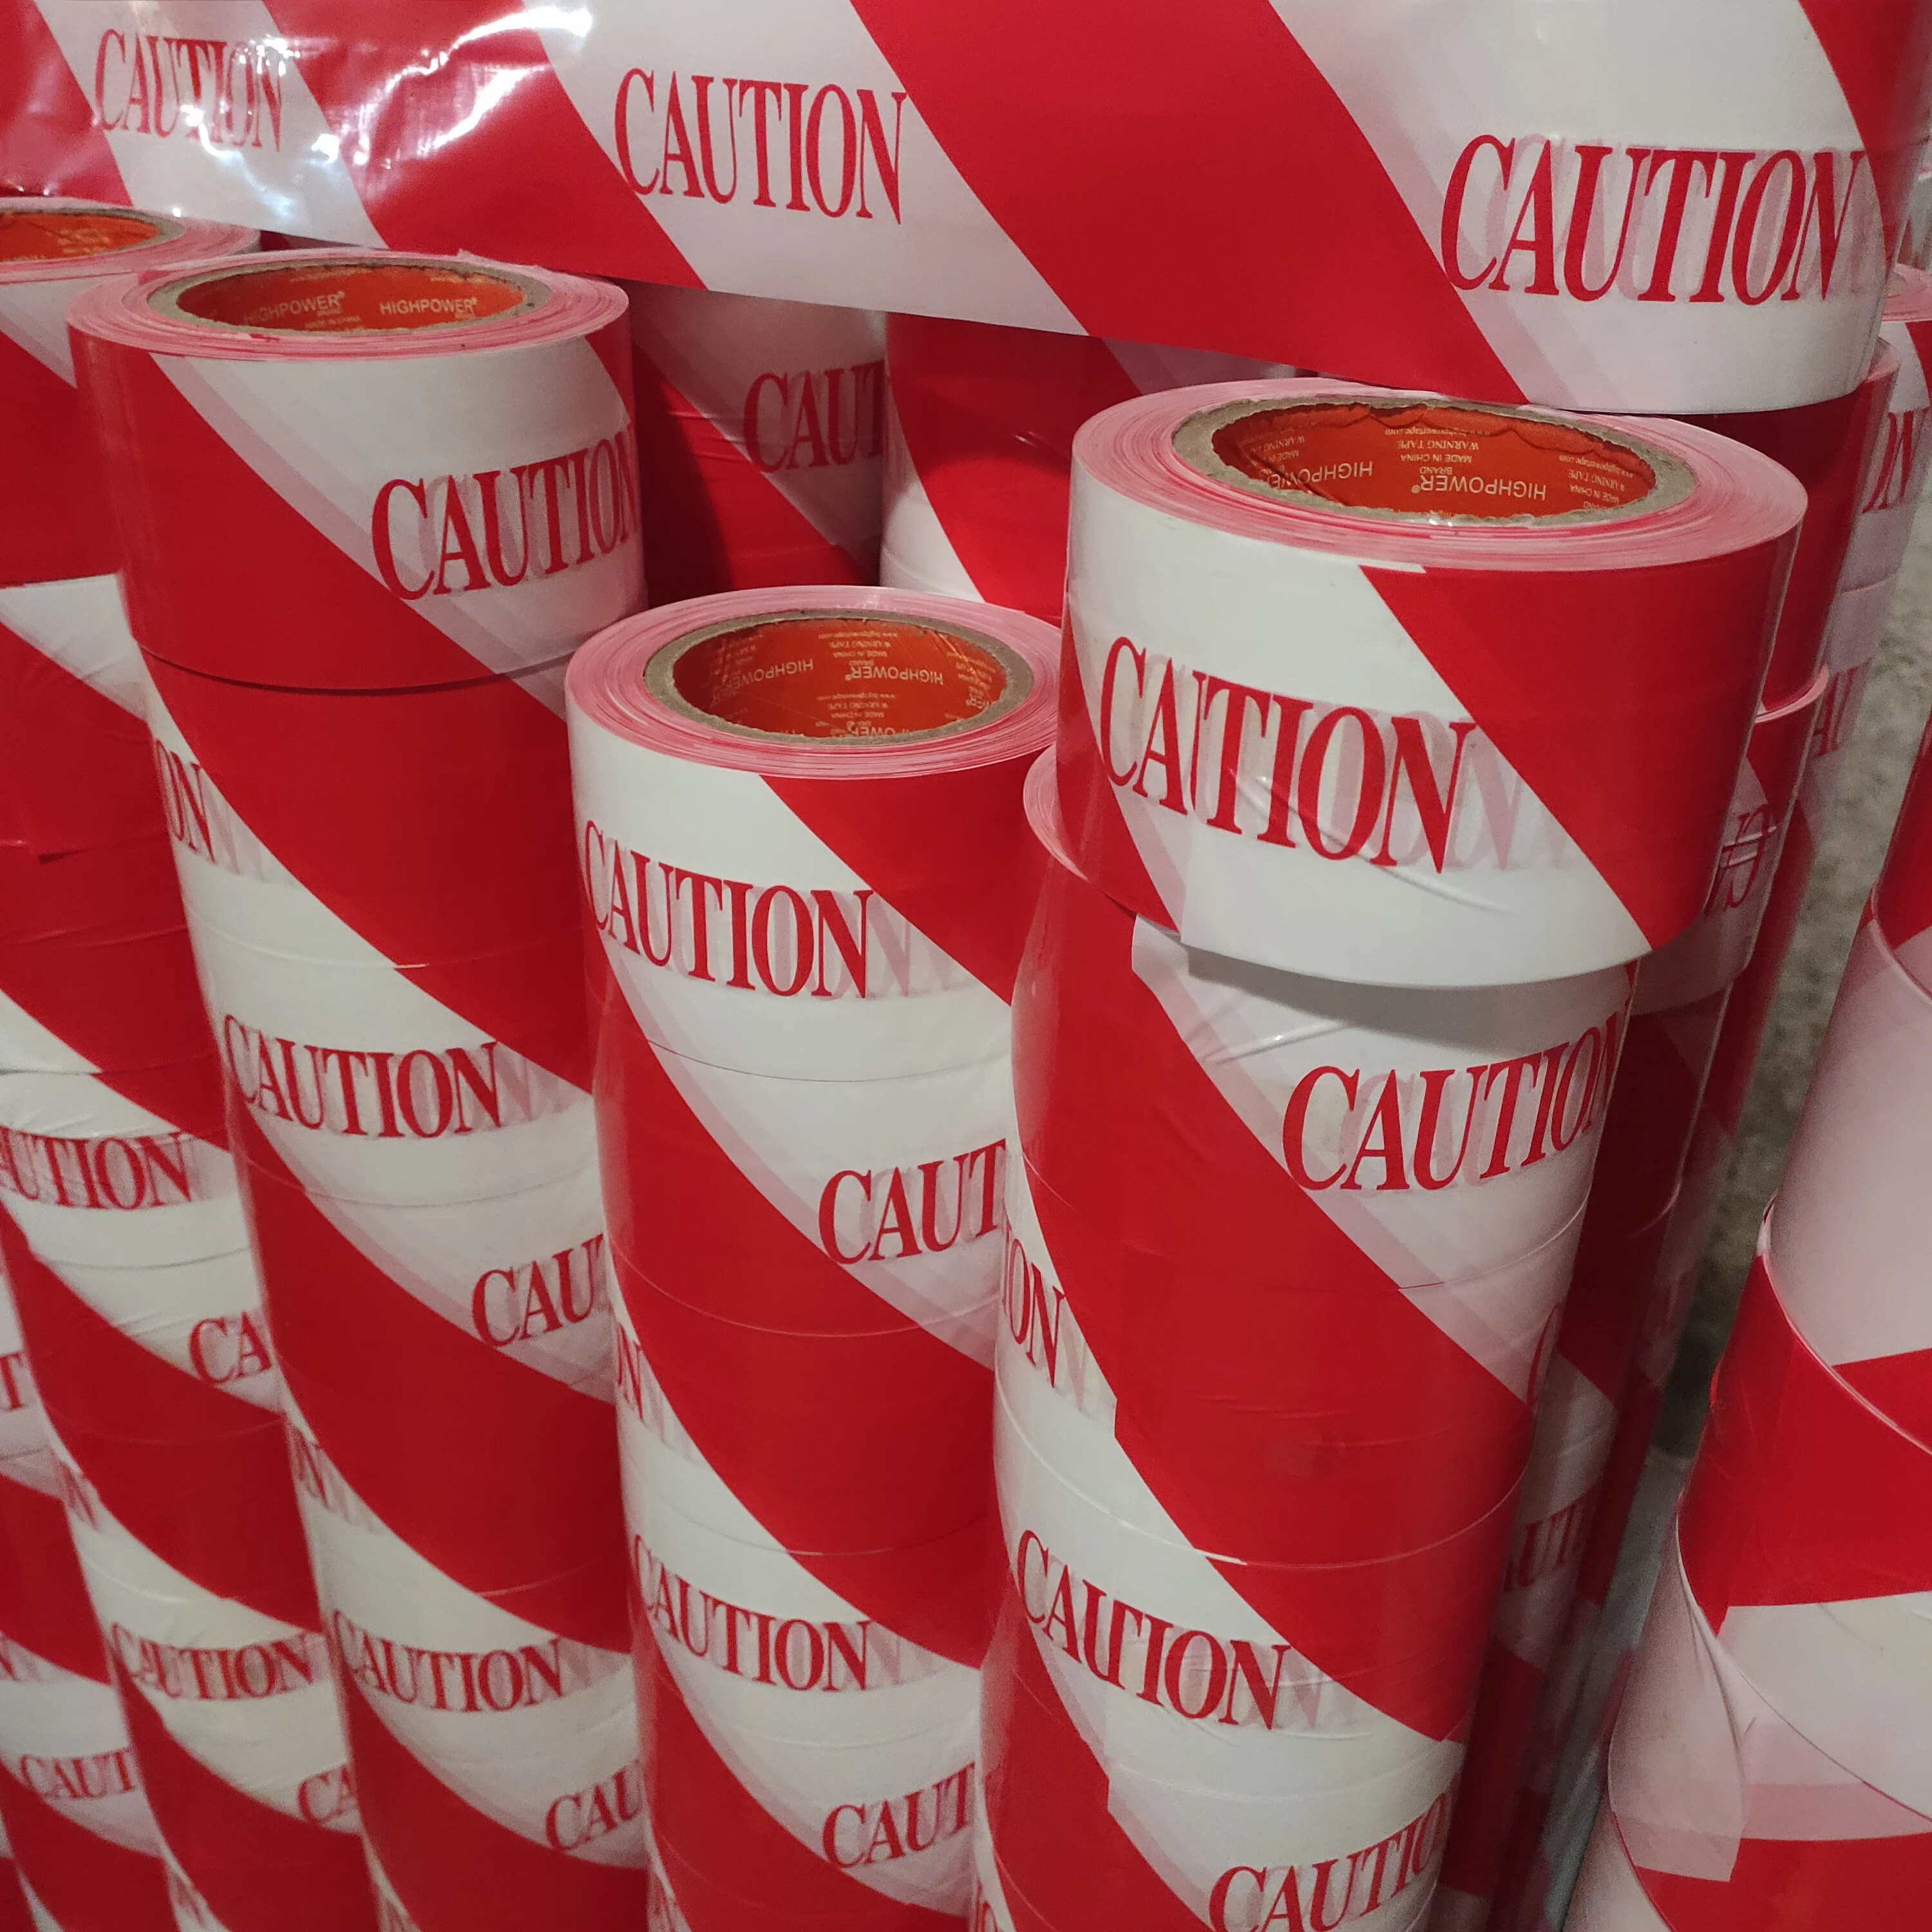 
Hot Sale red white with caution warning tape 